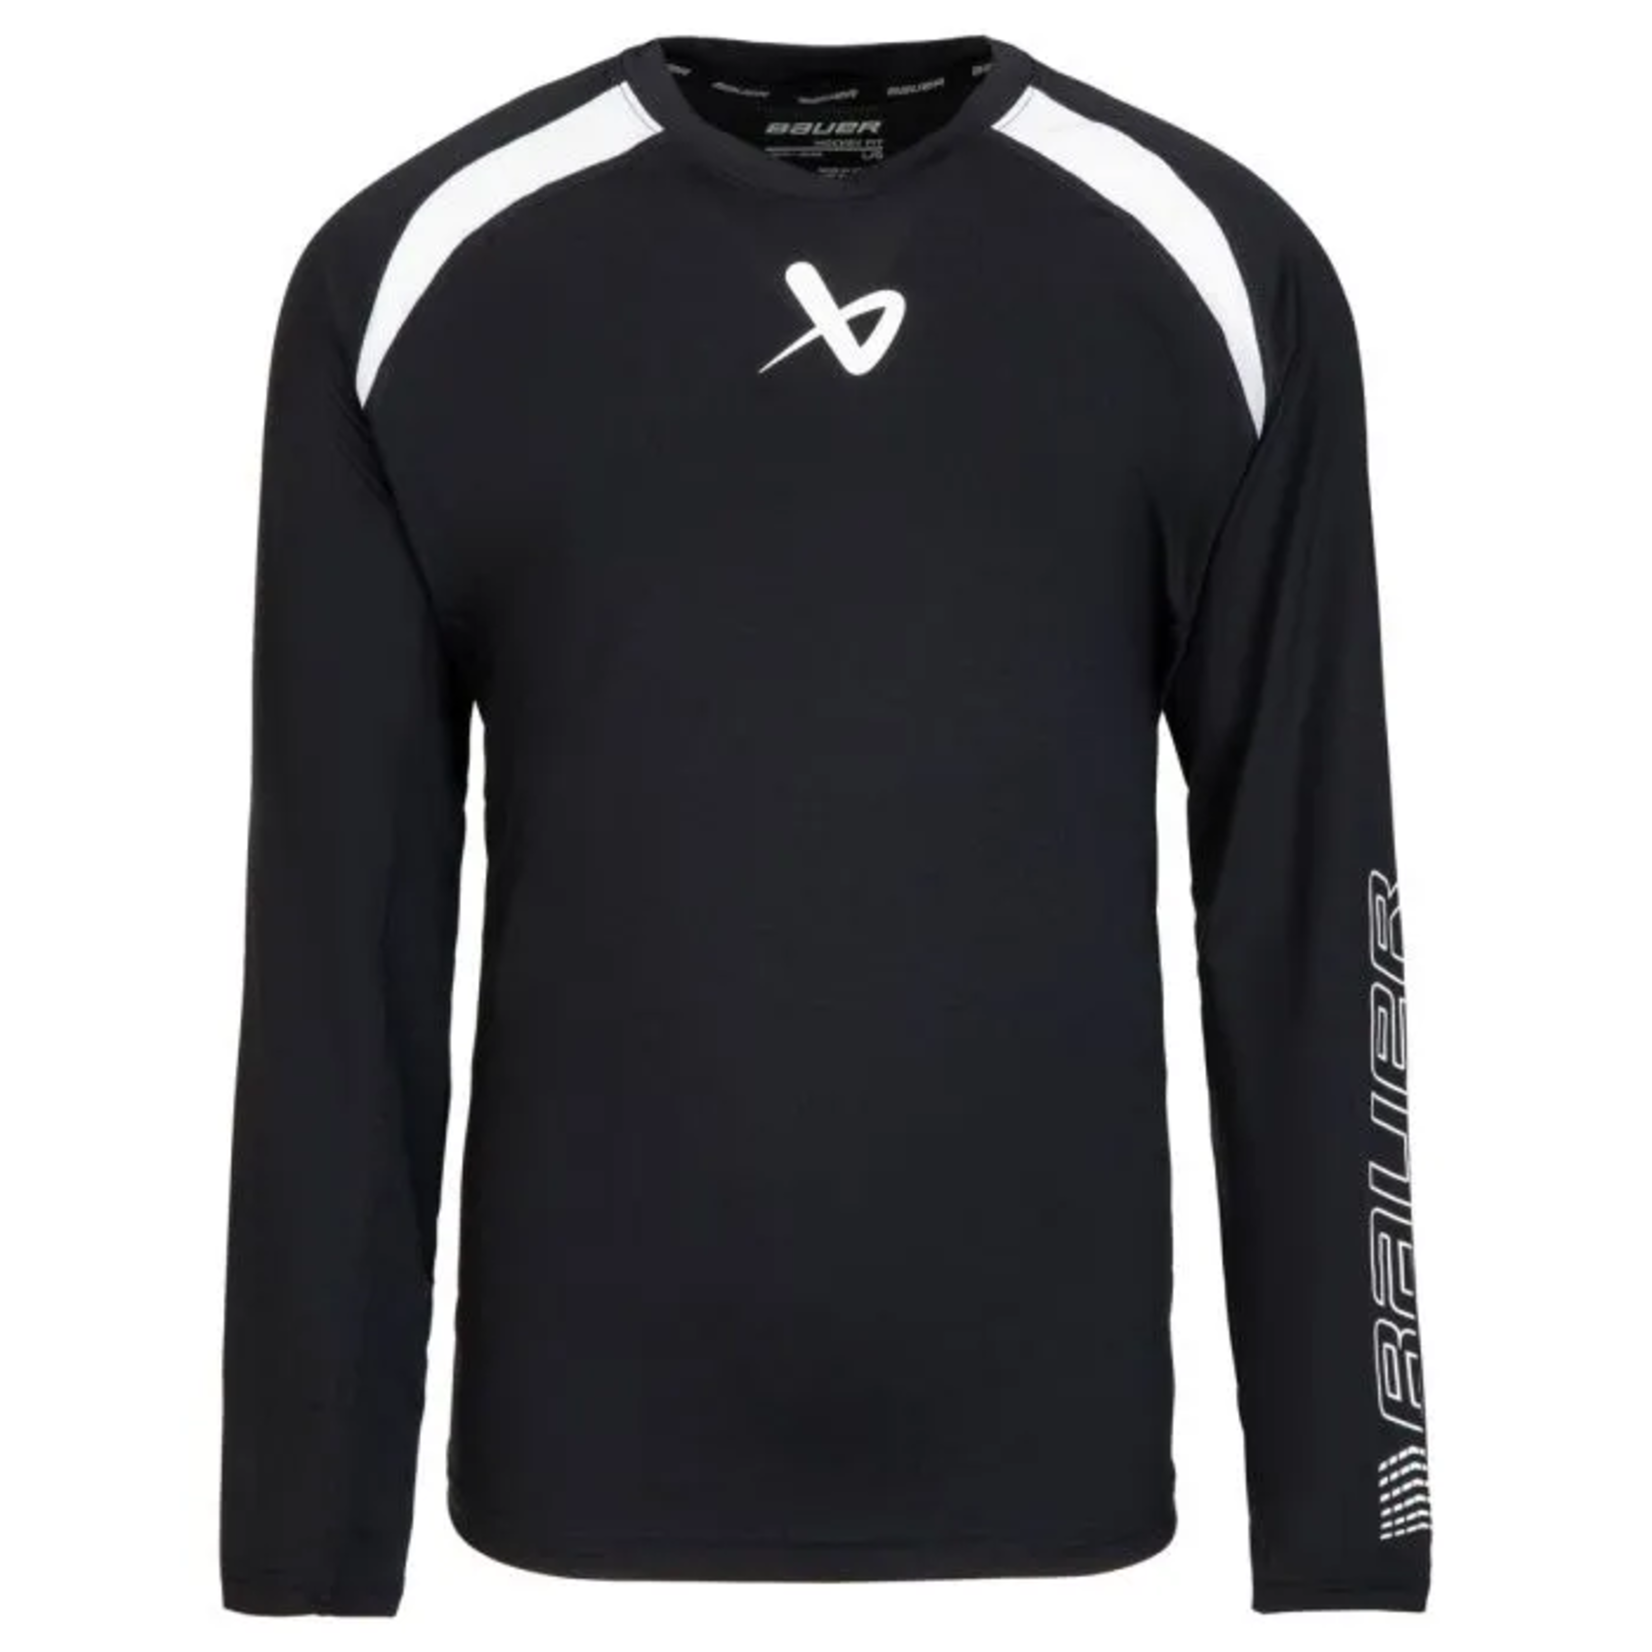 Bauer Bauer Long Sleeve Shirt, Performance Baselayer Top, Youth